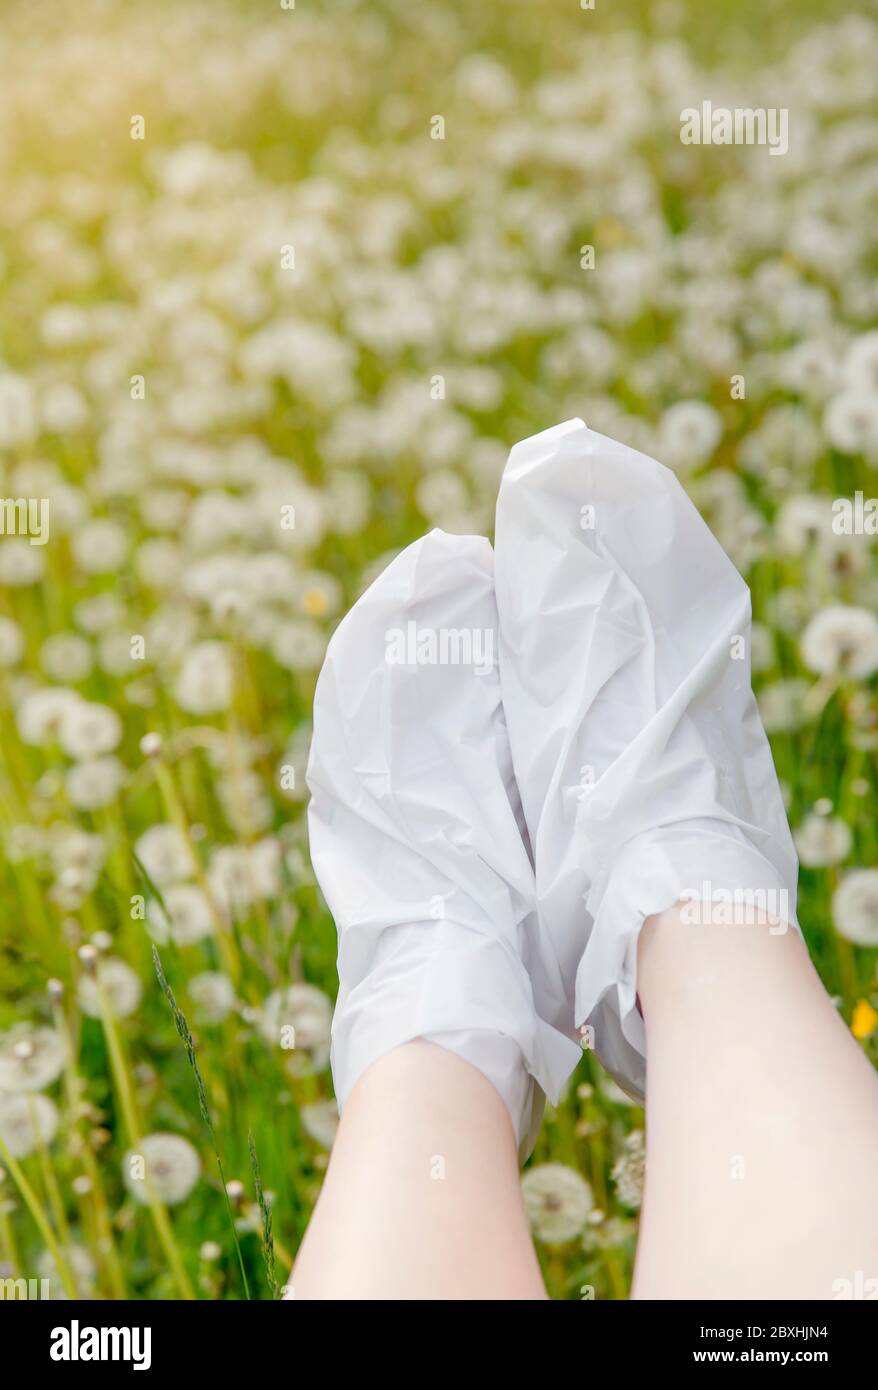 Moisturizing foot mask for dry heels feet. Woman wearing one time moisturizing foot mask socks outdoors with soft dandelion meadow on background. Stock Photo